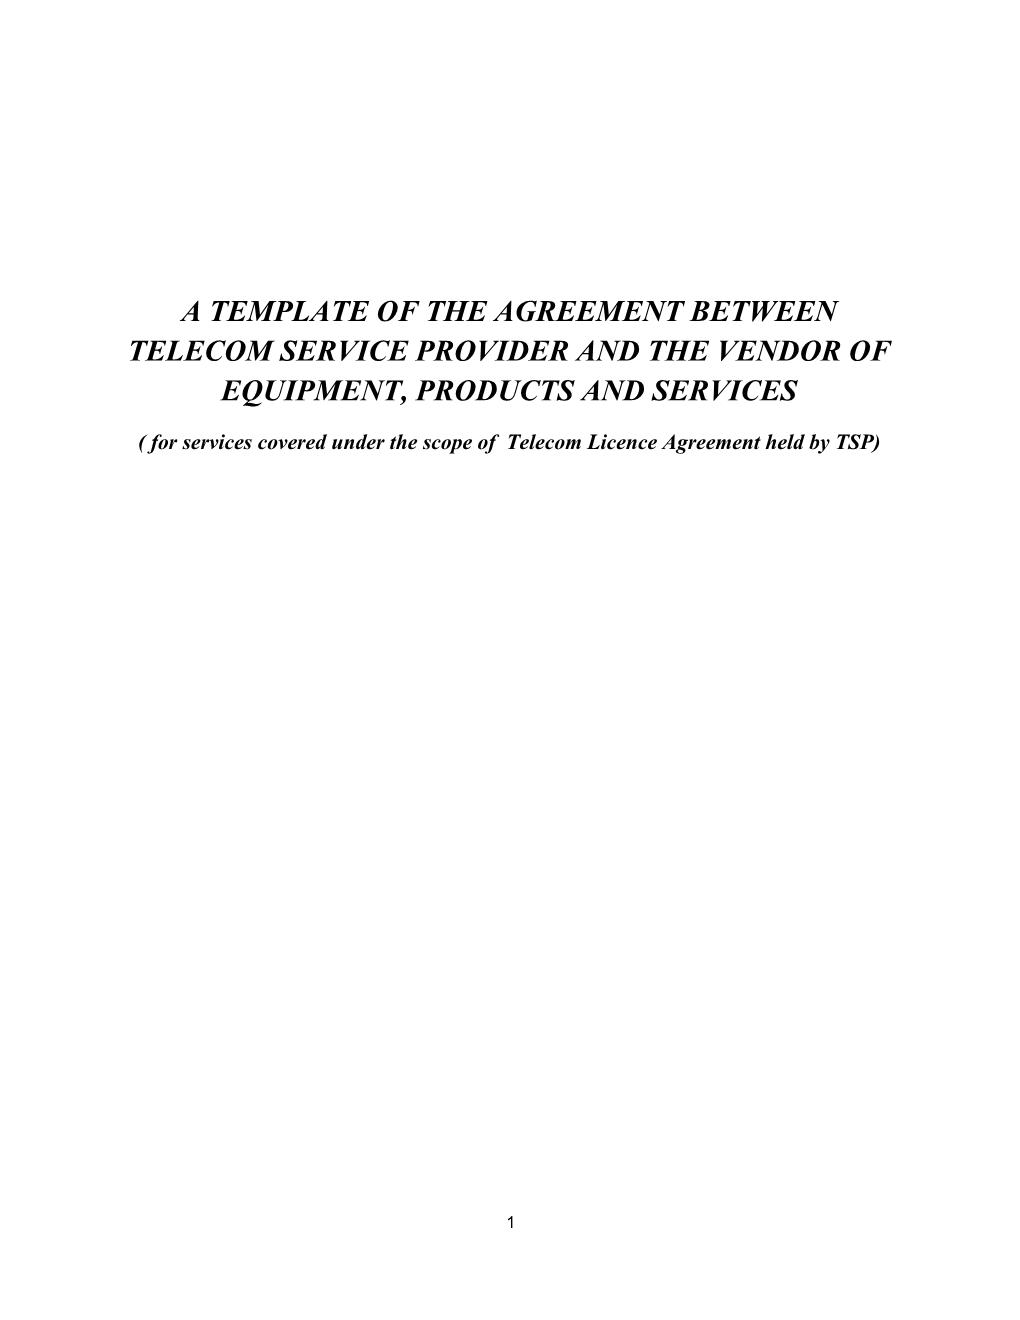 A Template of the Agreement Between Telecom Service Provider and the Vendor of Equipment